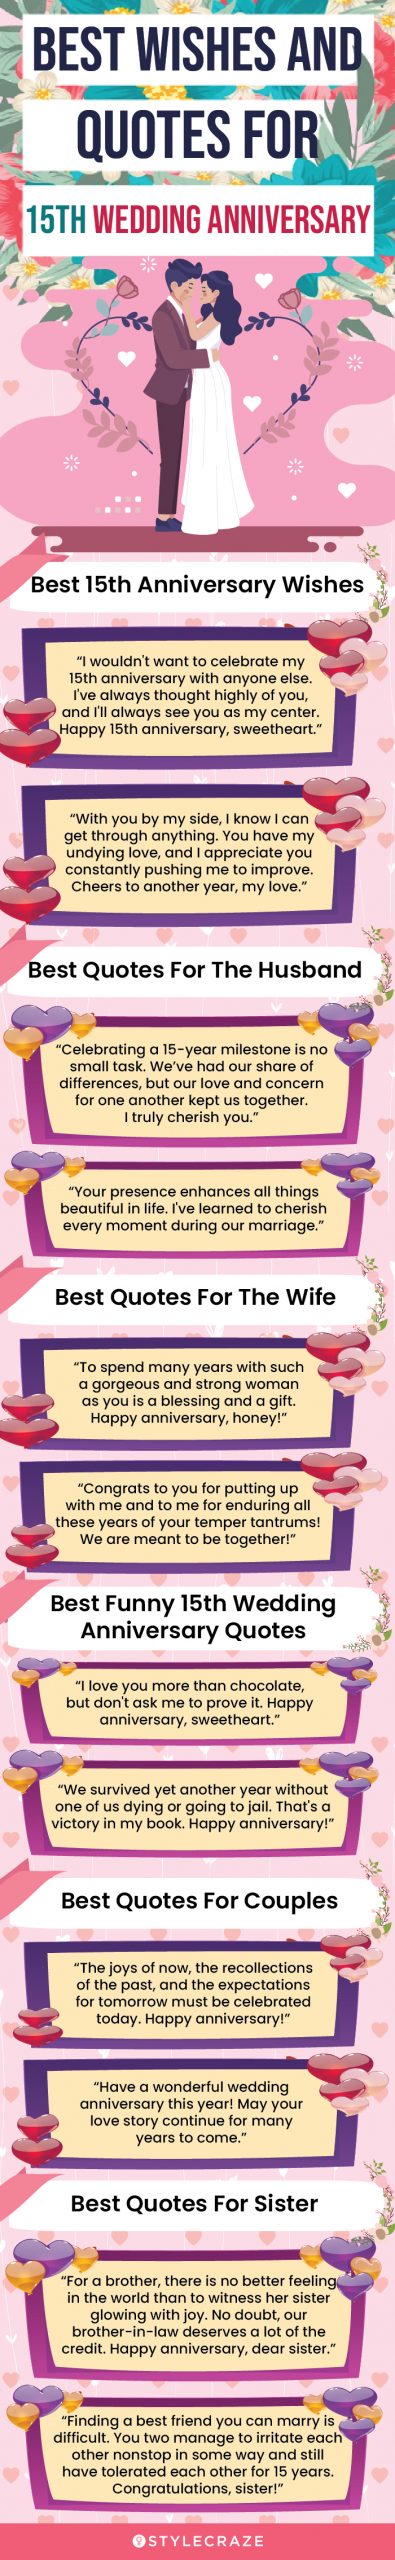 best wishes and quotes for 15th wedding anniversary (infographic)